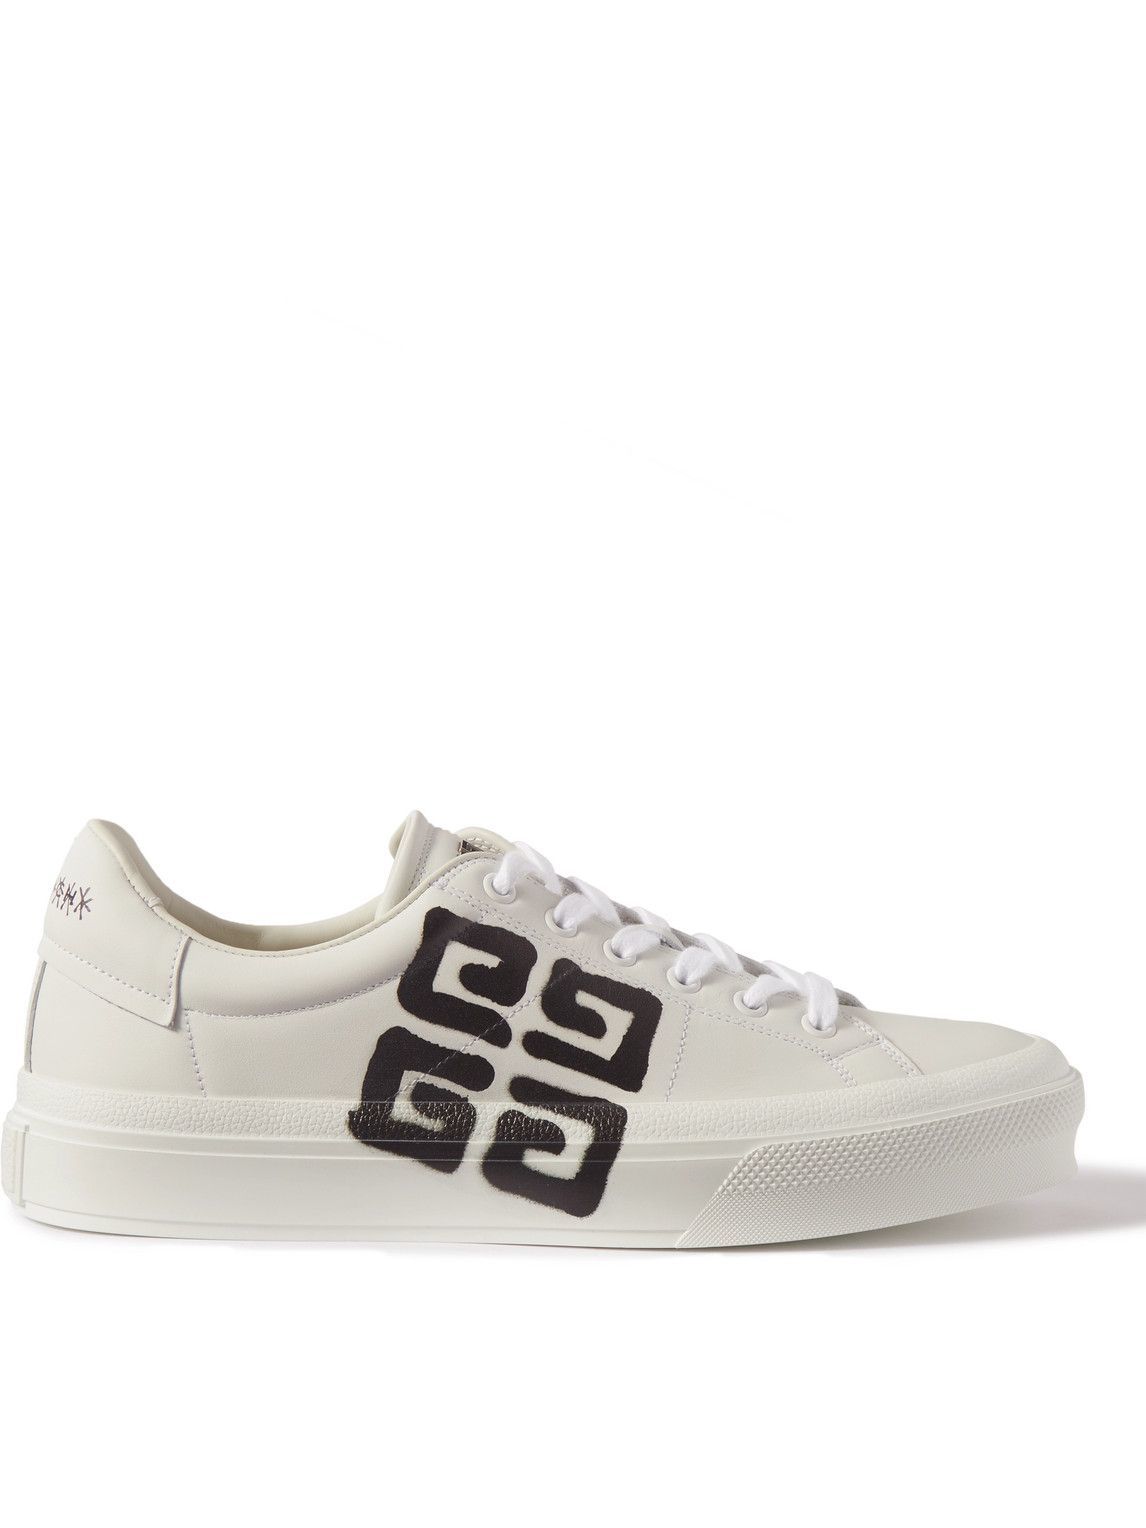 Givenchy - Chito City Sport Logo-Print Leather Sneakers - White Givenchy